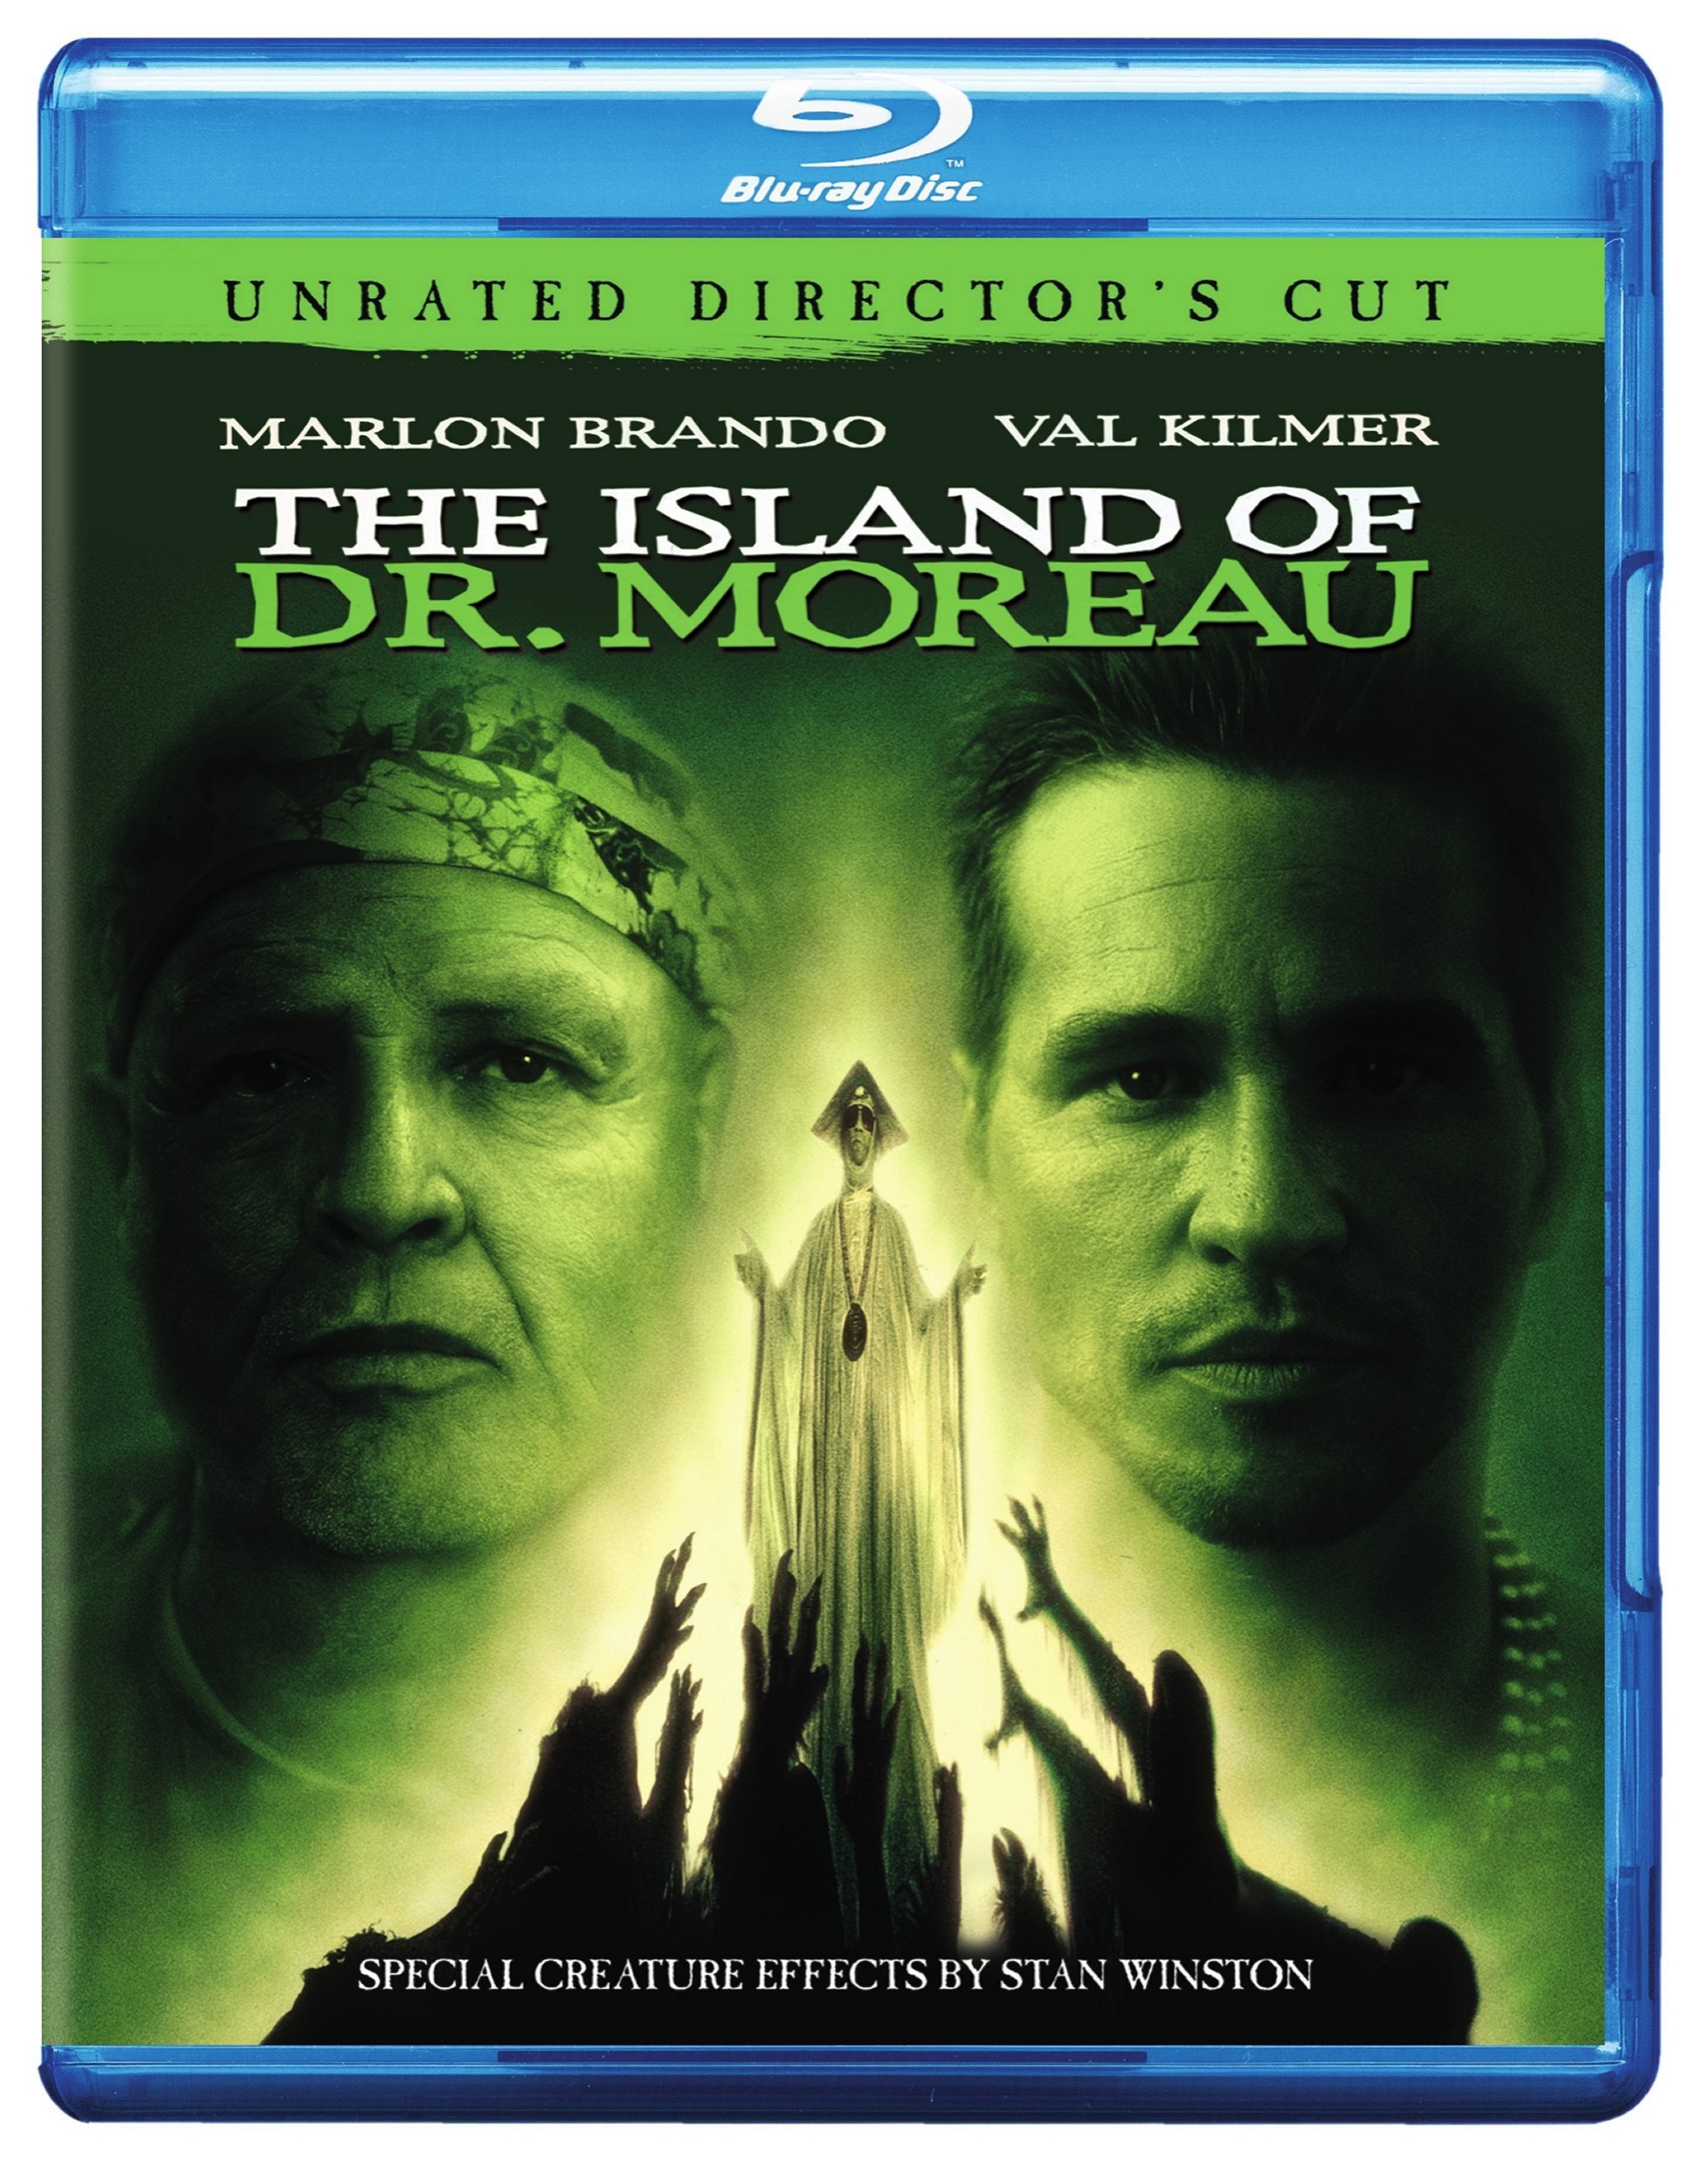 The Island Of Dr. Moreau (Blu-ray Unrated Director's Cut) - Blu-ray [ 1996 ]  - Sci Fi Movies On Blu-ray - Movies On GRUV